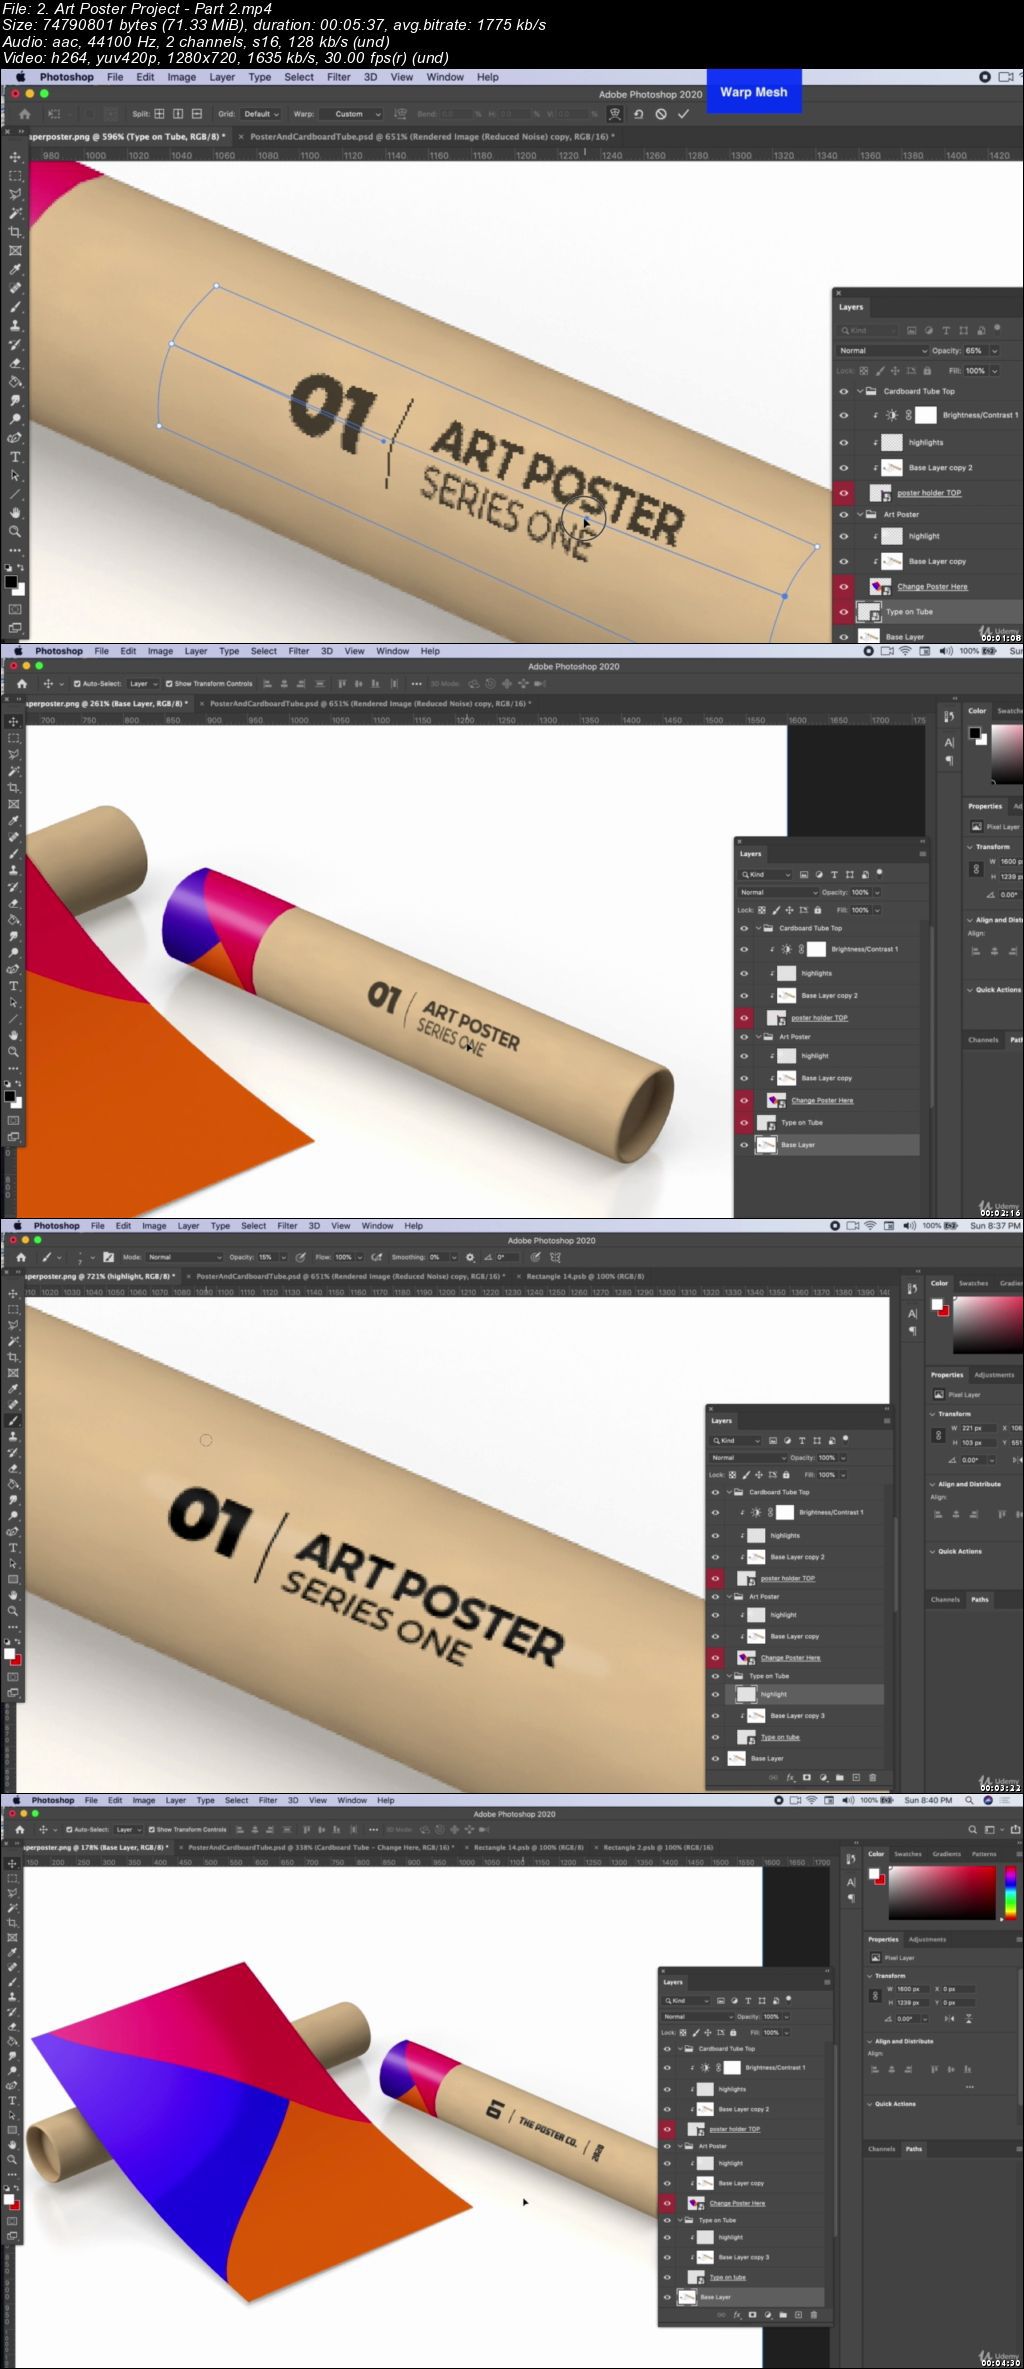 Download Mockup Creation Course for Adobe Photoshop or Affinity ...